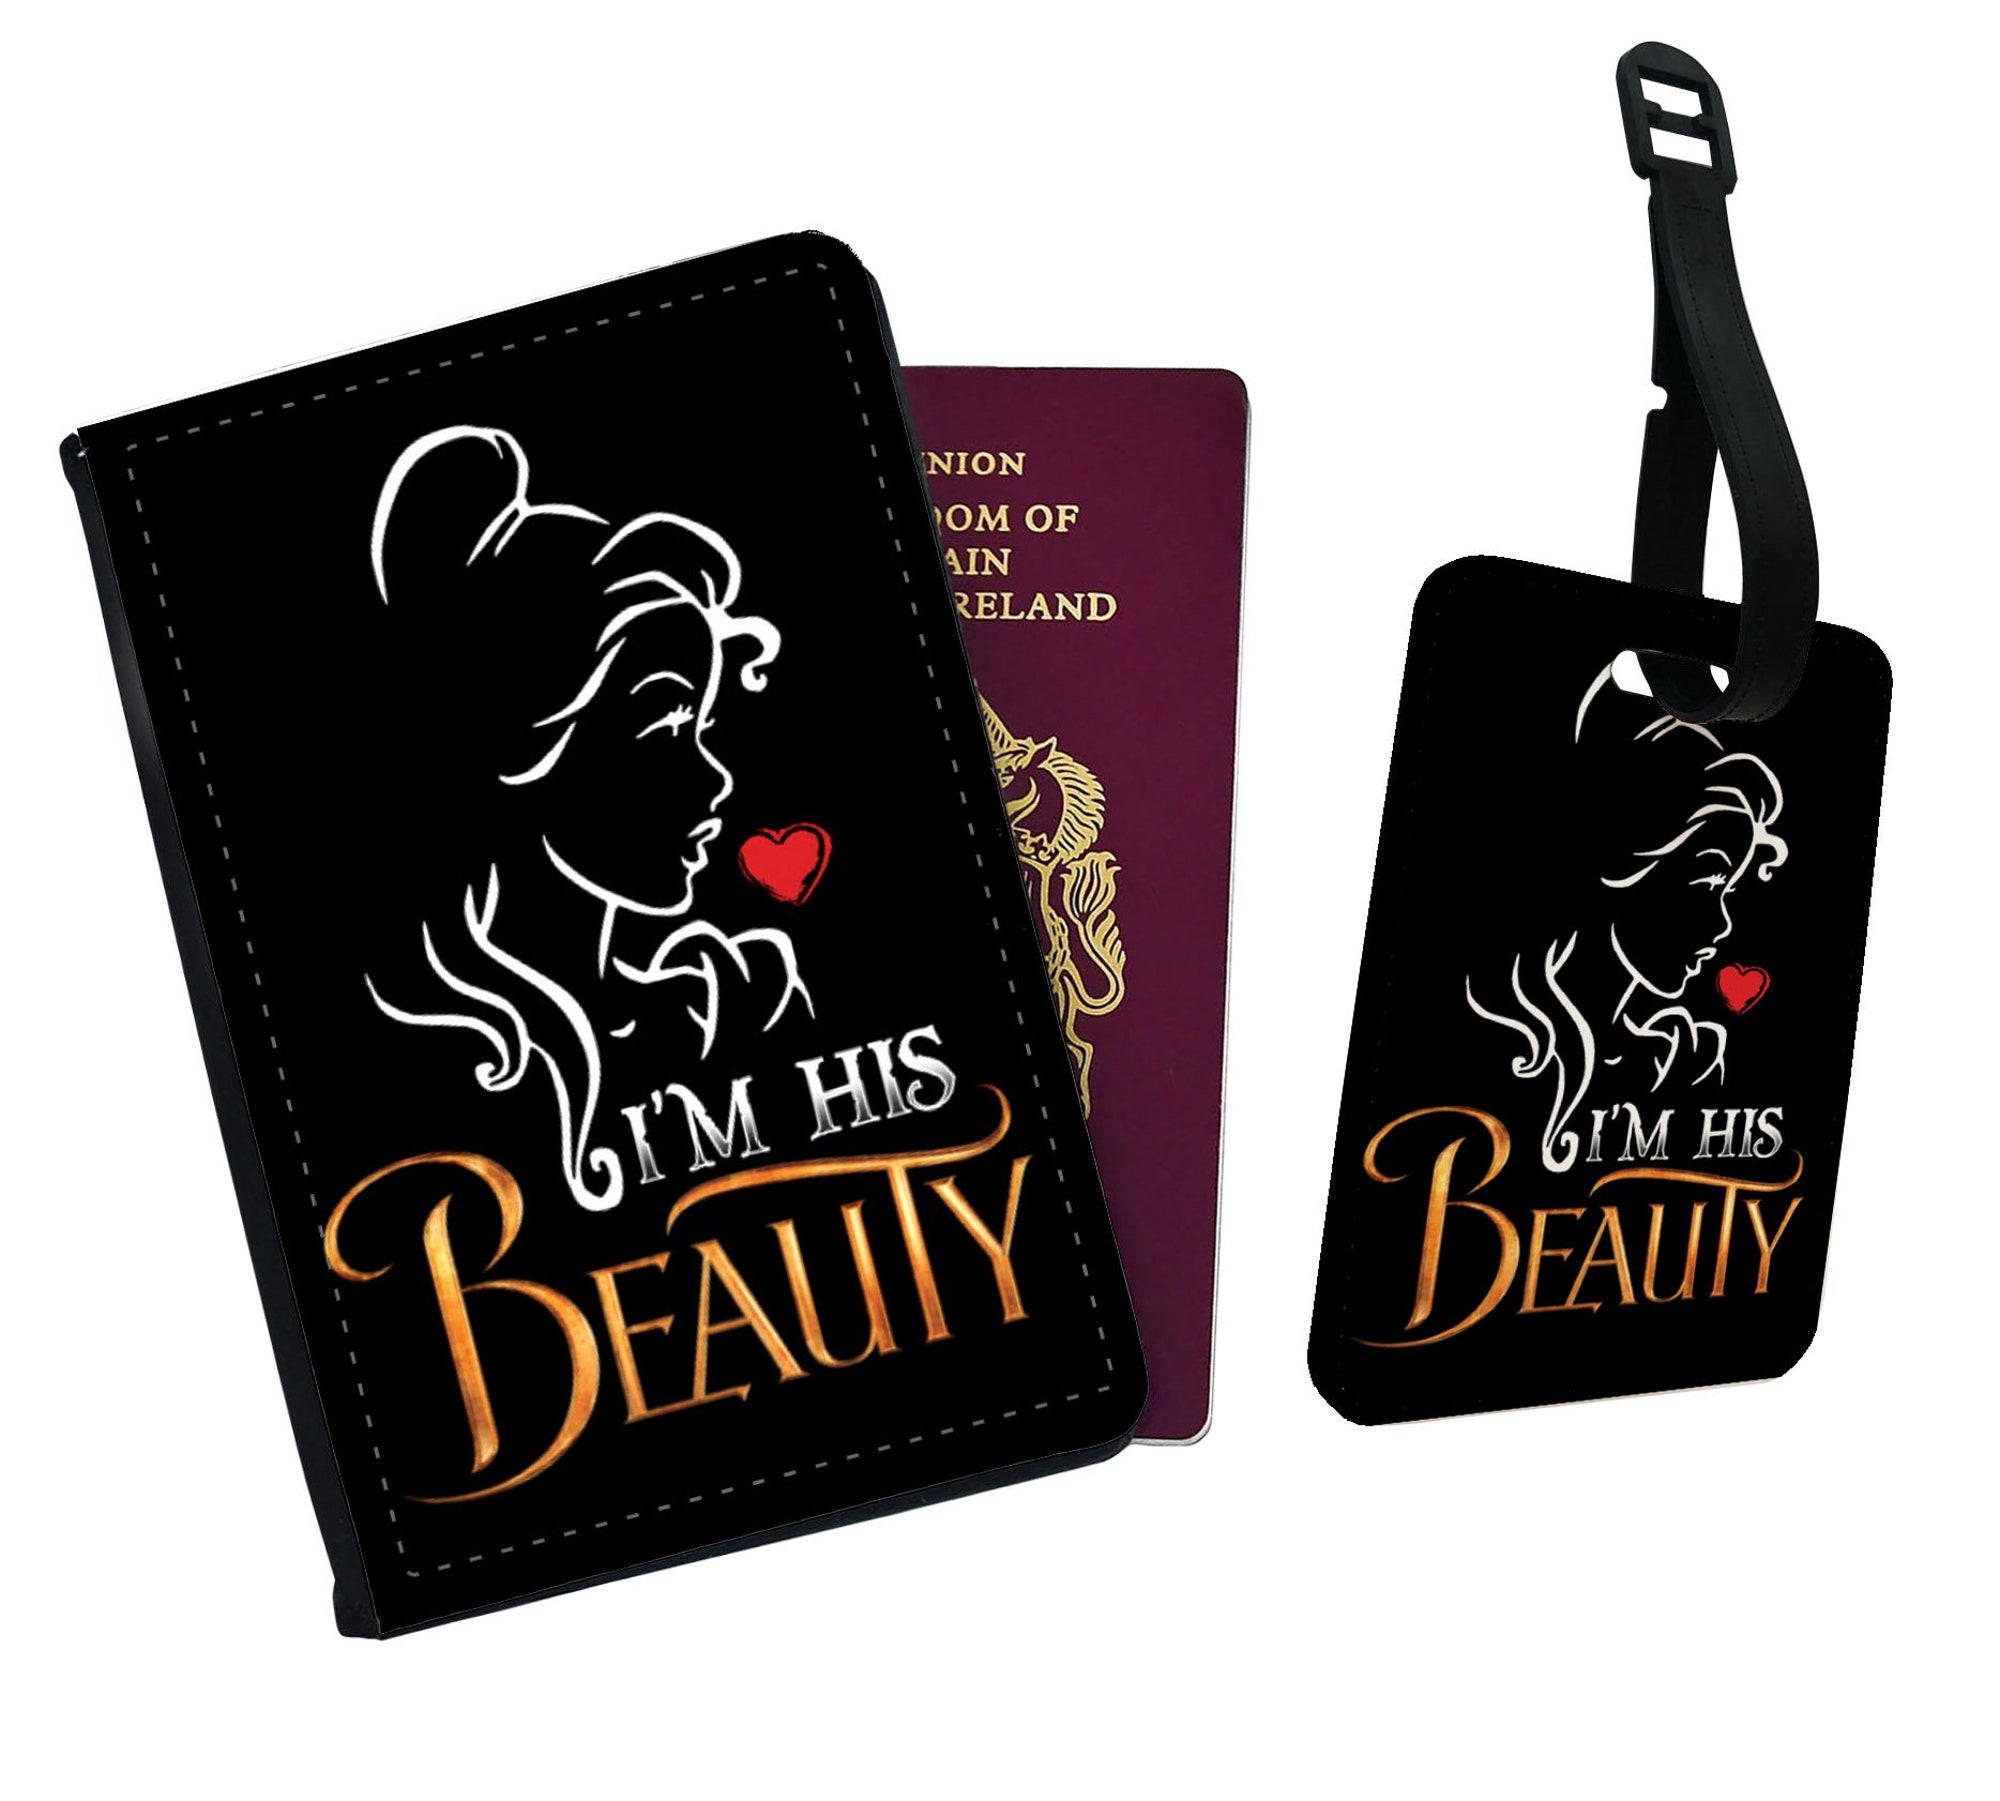 Disney Beauty and the Beast Passport Cover